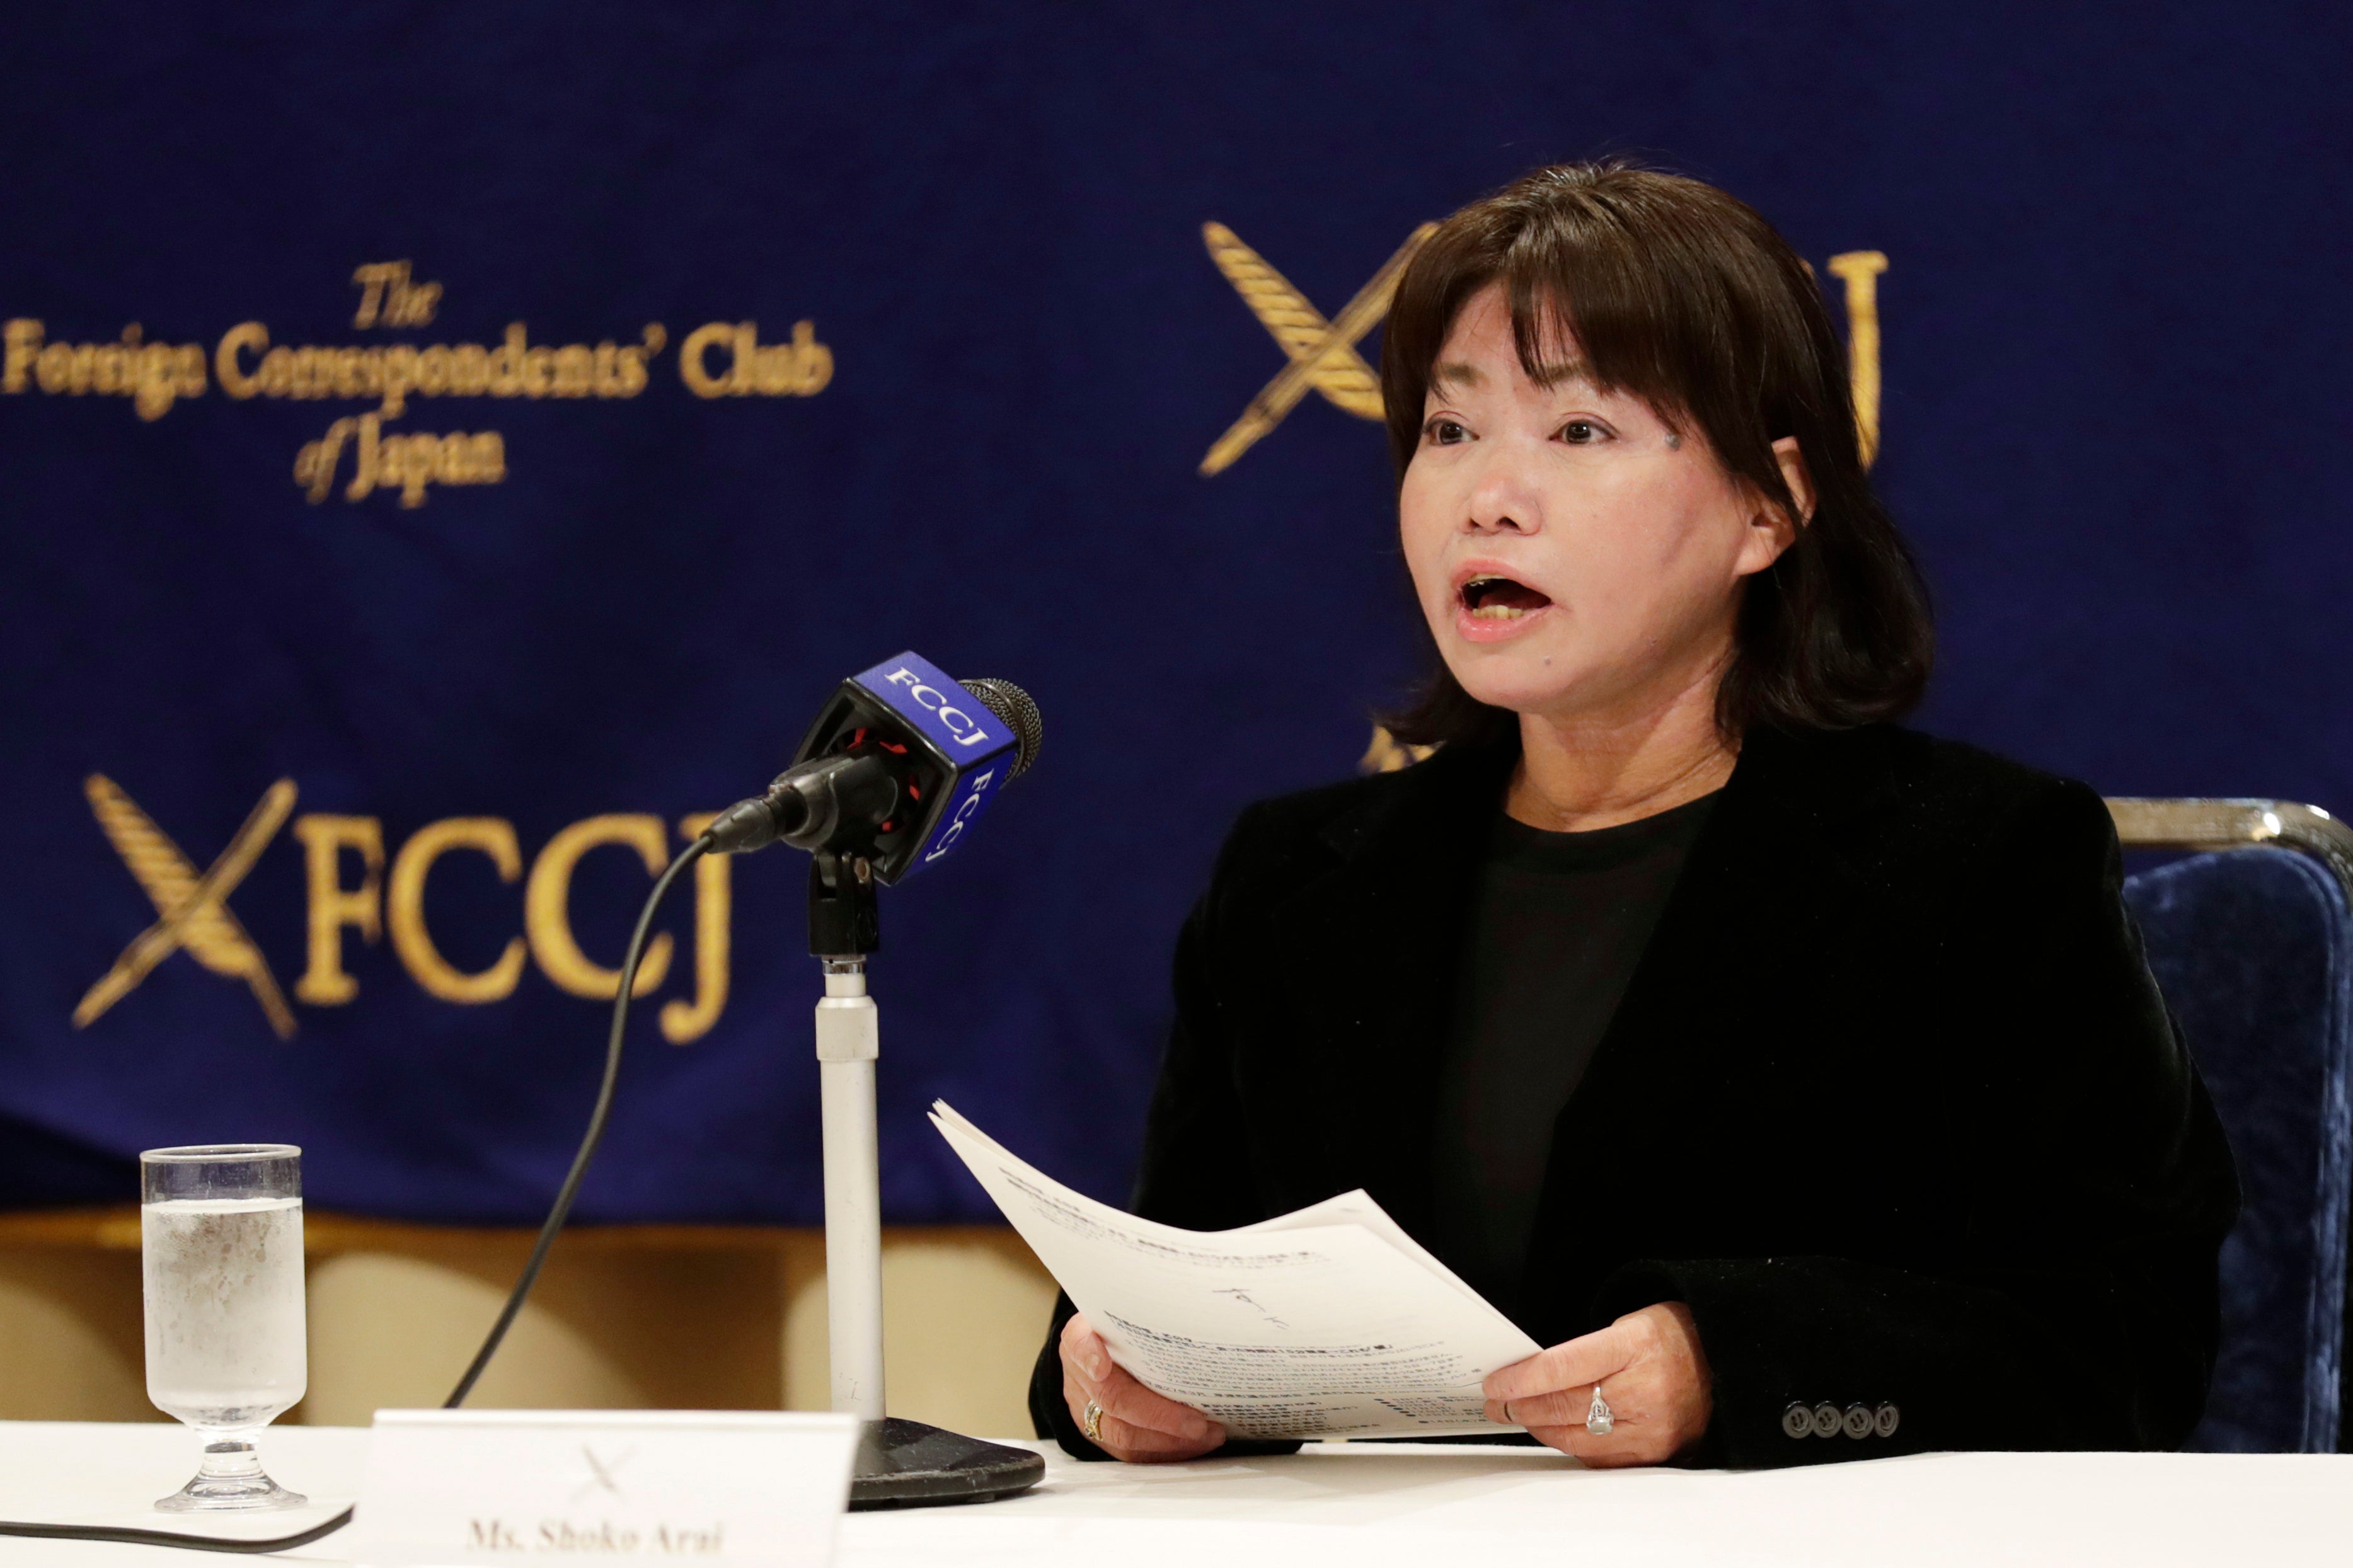 Japan councilwomen says ouster shows gender bias in politics Mayor politics hot springs problems women The Independent photo